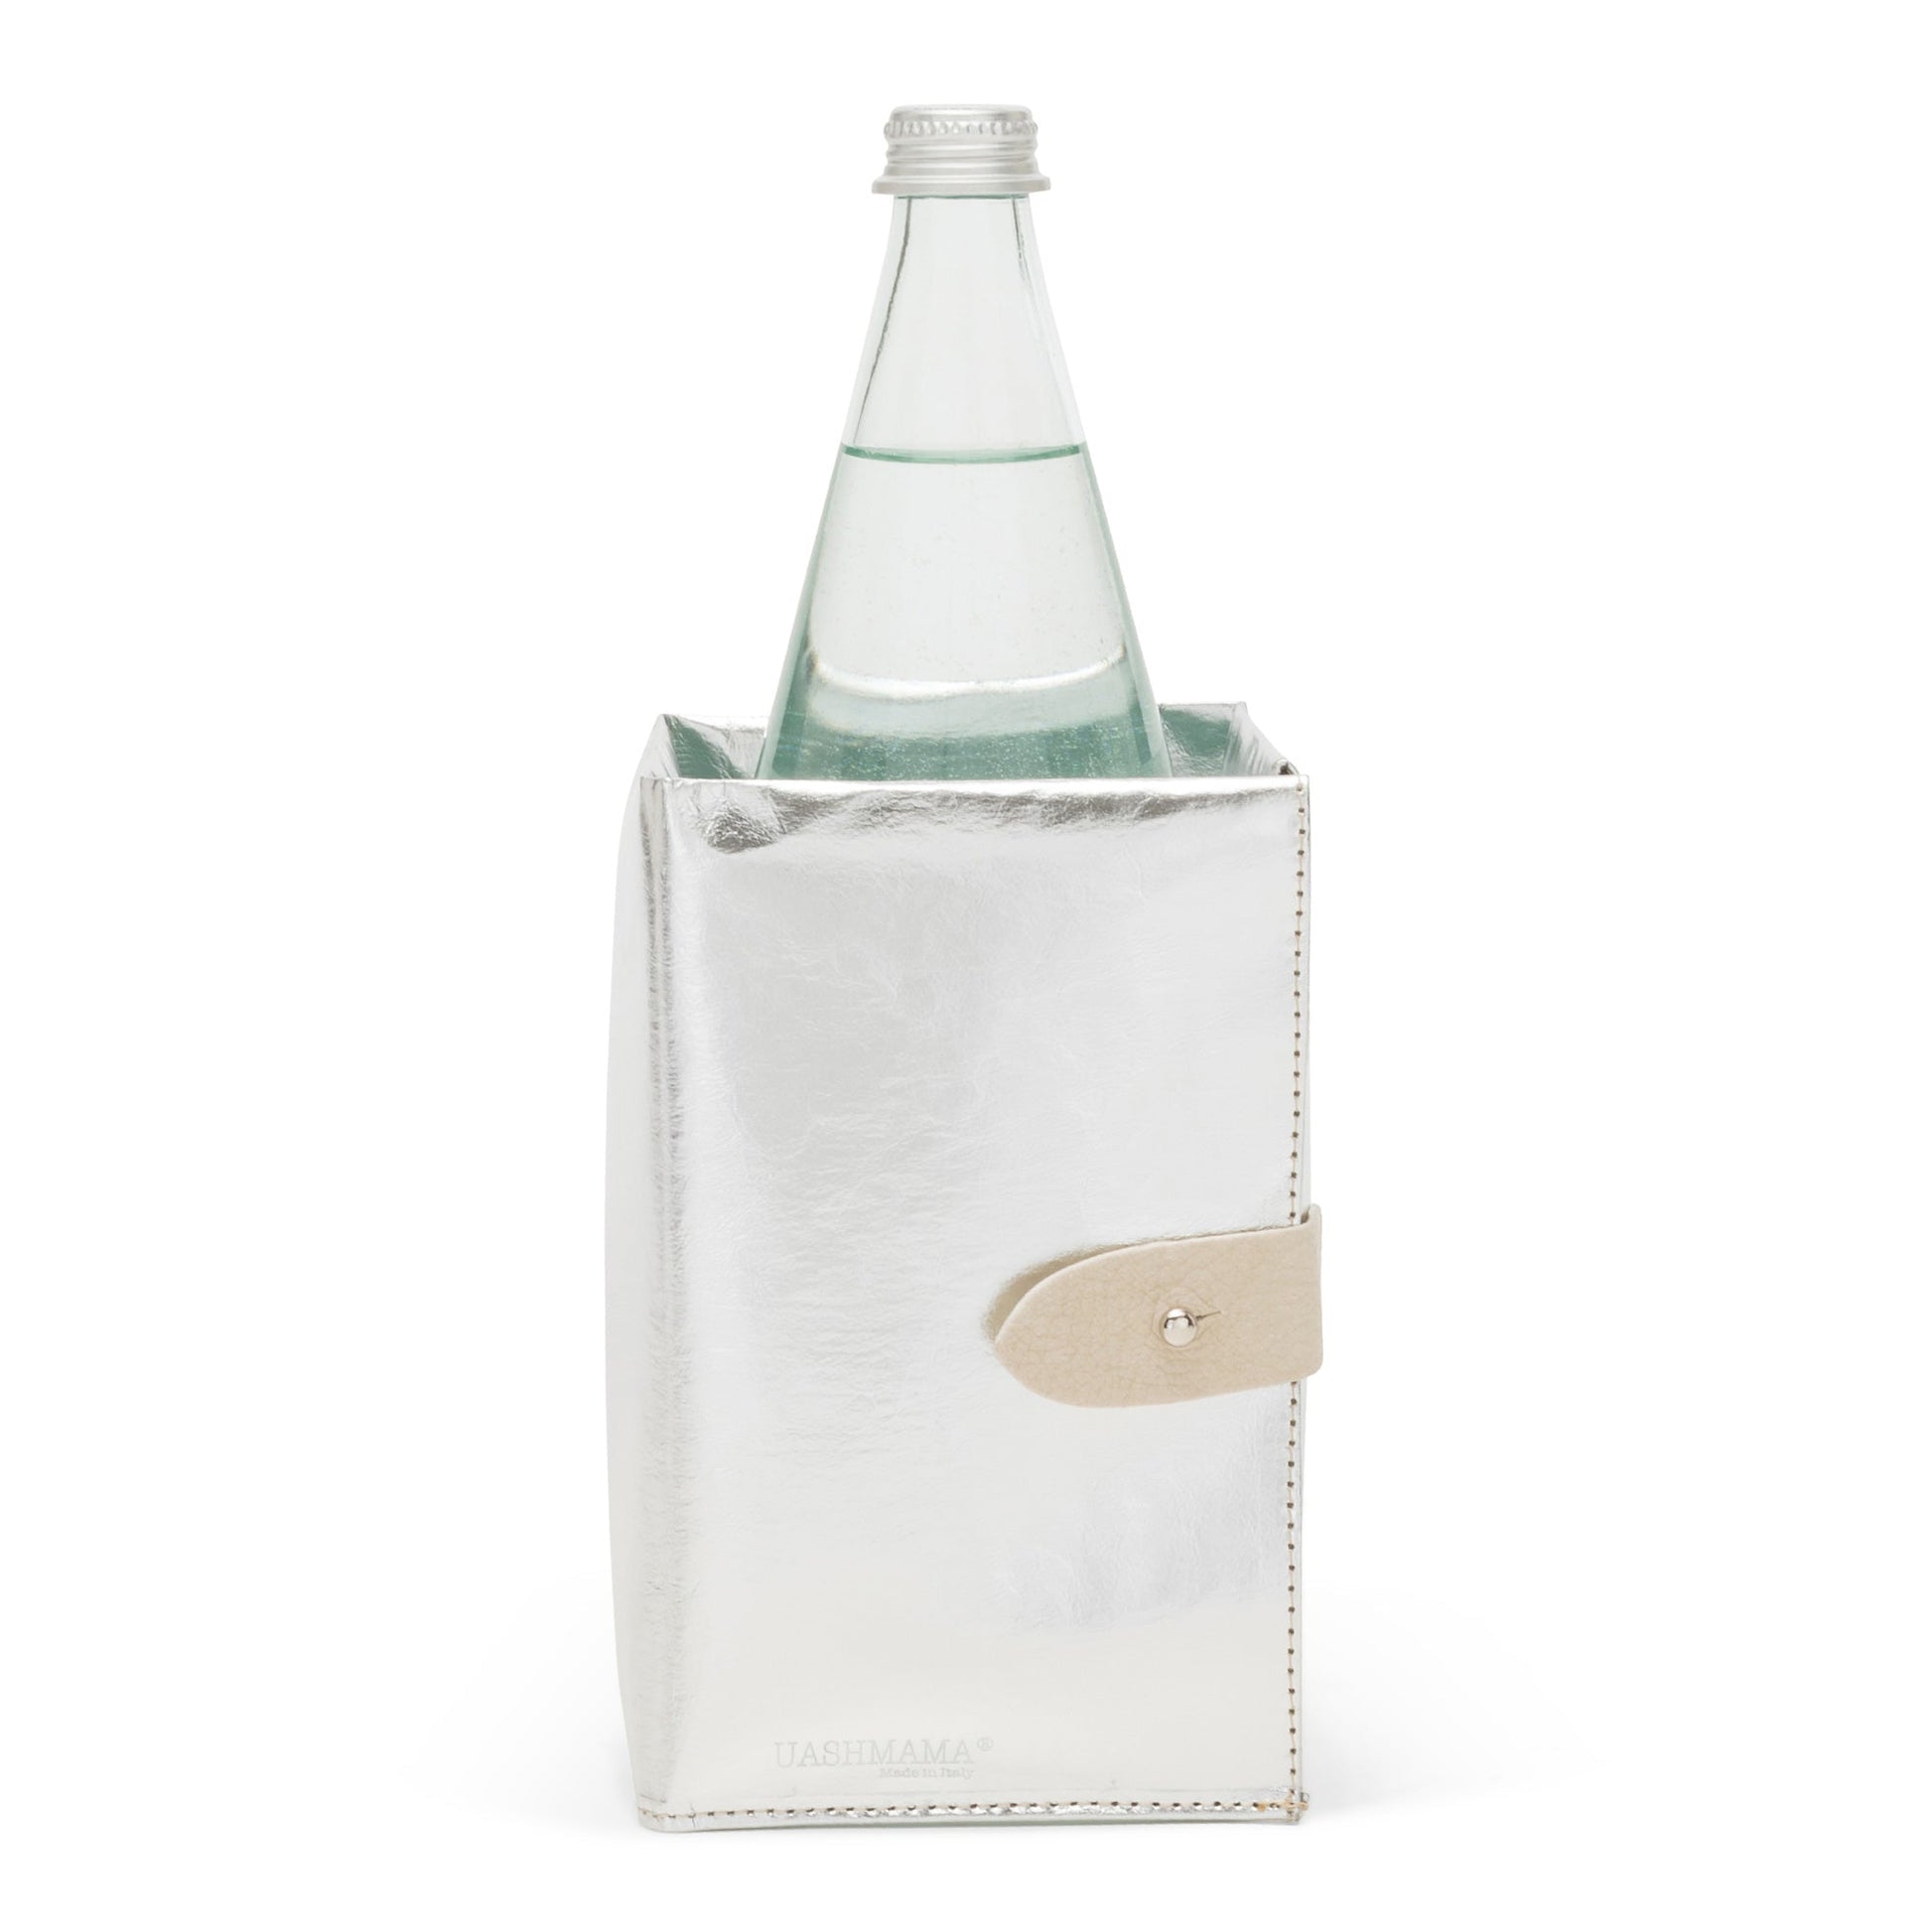 A silver metallic washable paper cooler is shown with a washable paper side tab with silver stud. It contains a glass water bottle.